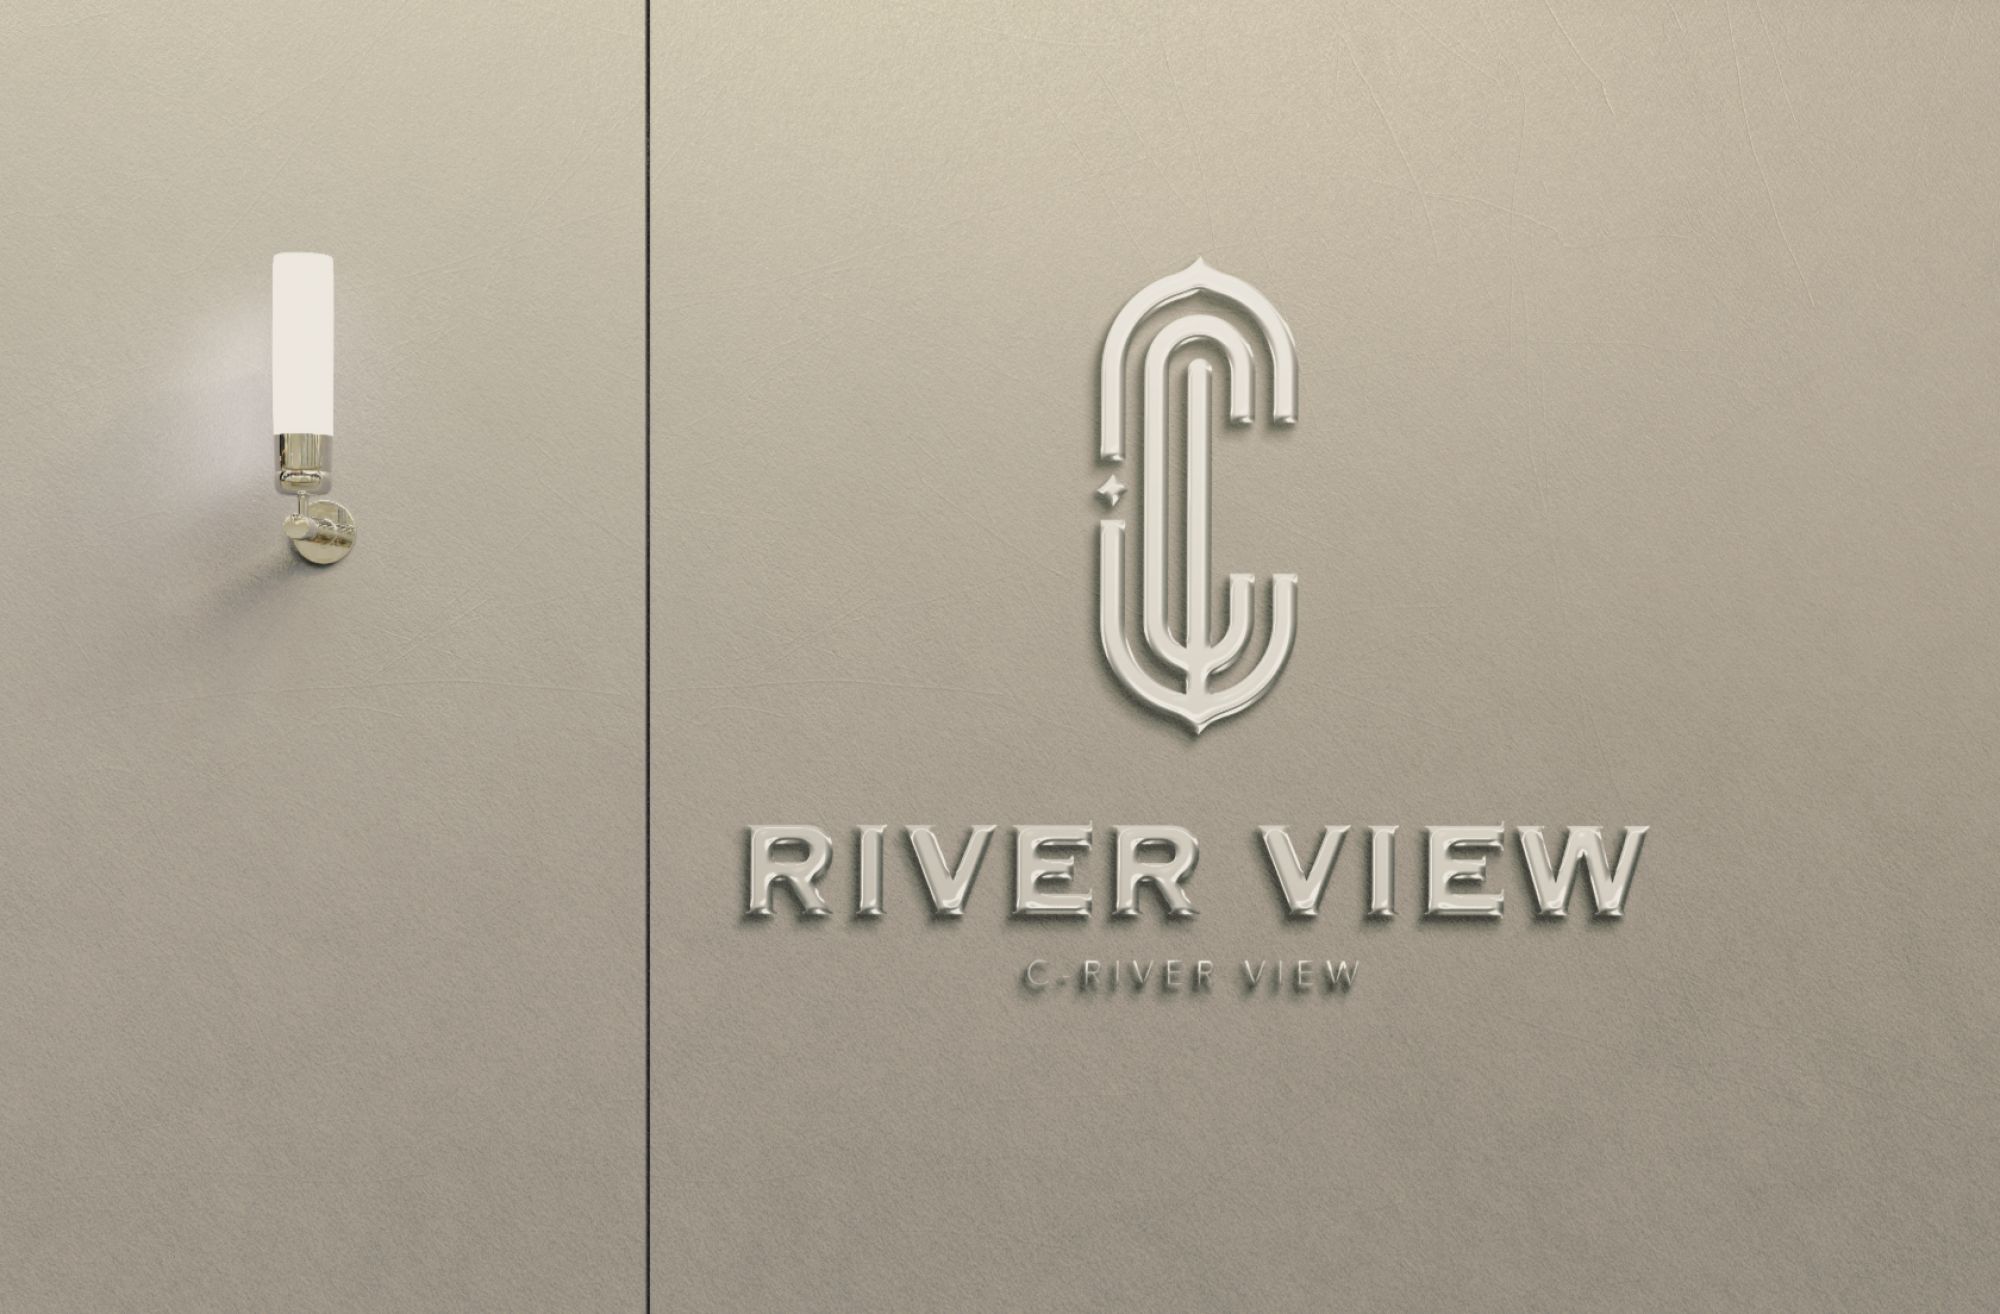 C-River View